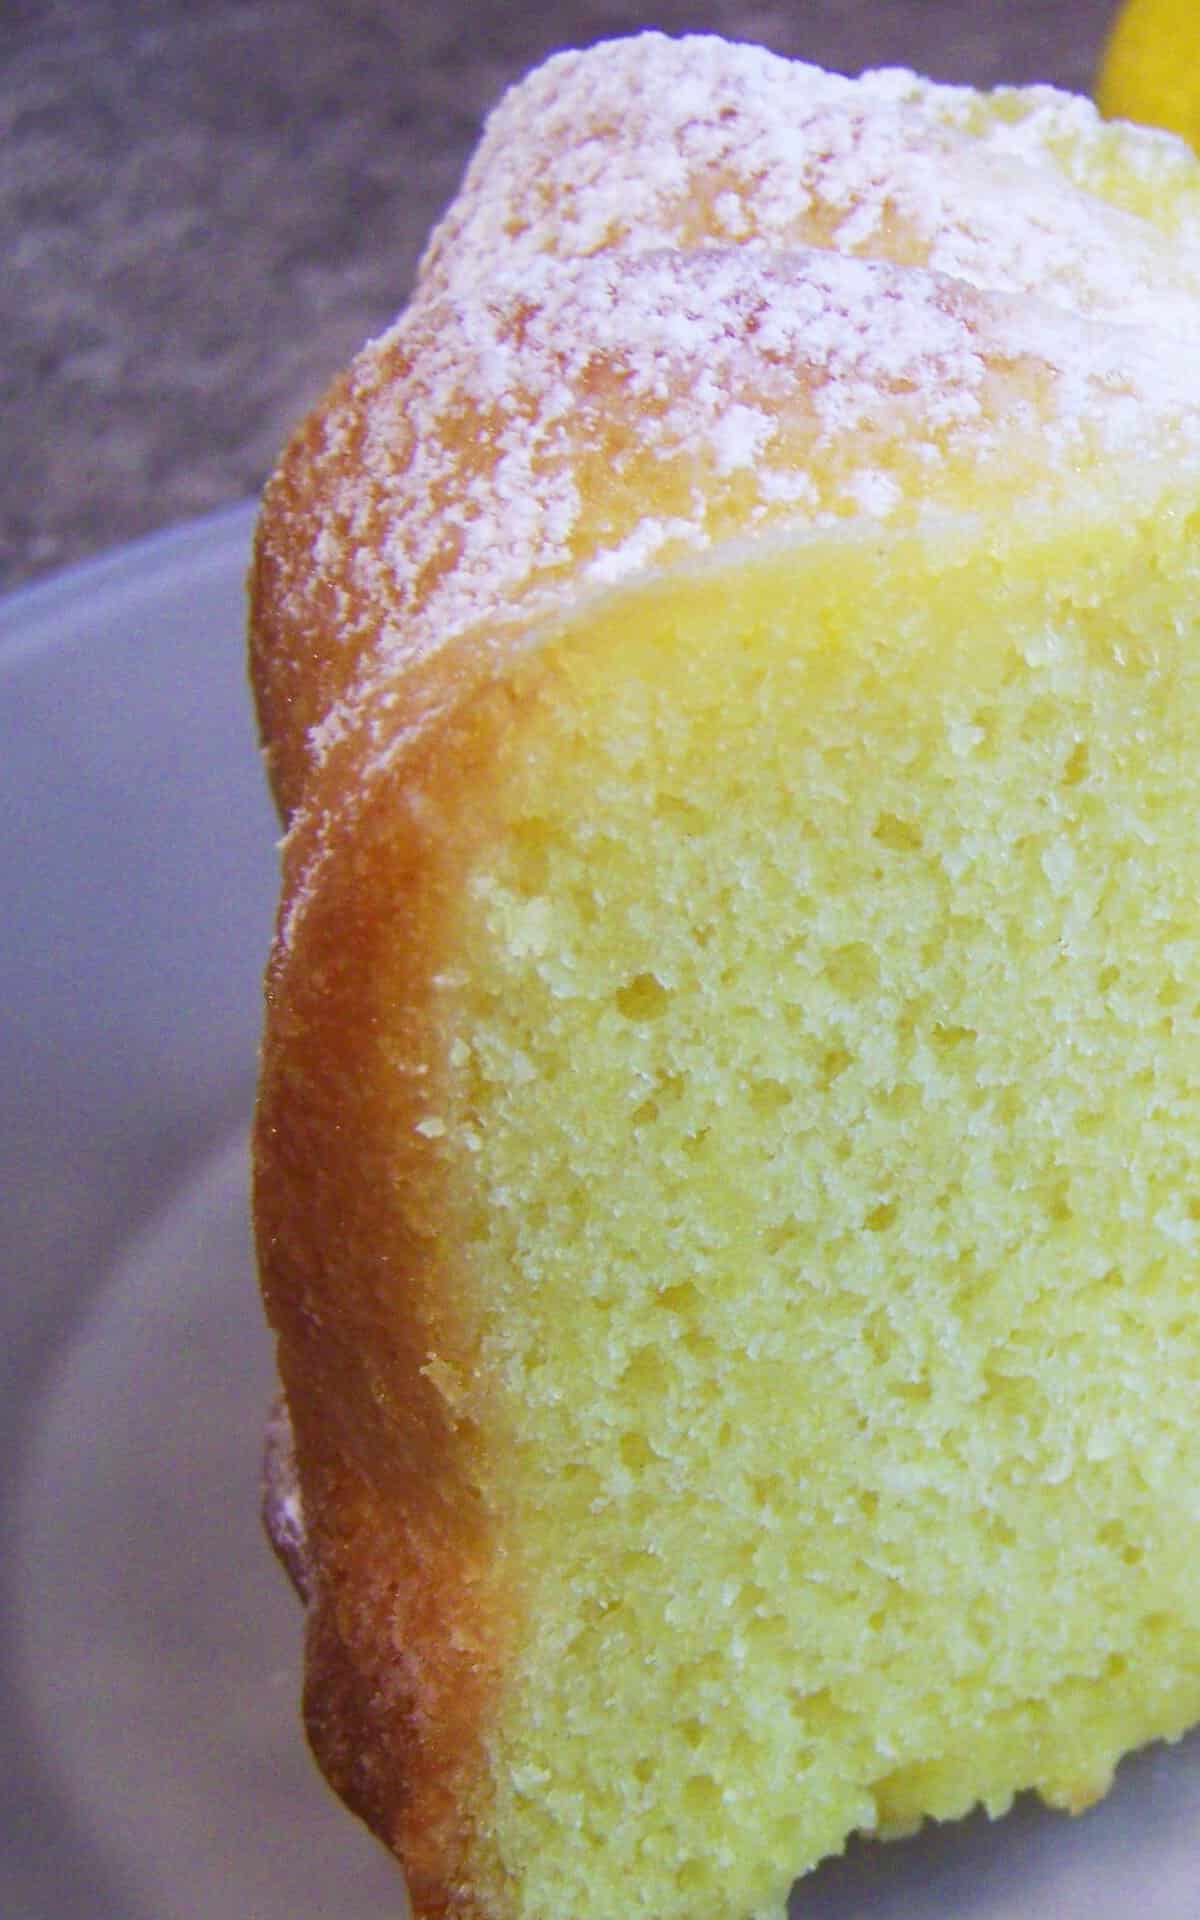 Delicious Lemon Cake Recipe to Satisfy Your Sweet Tooth